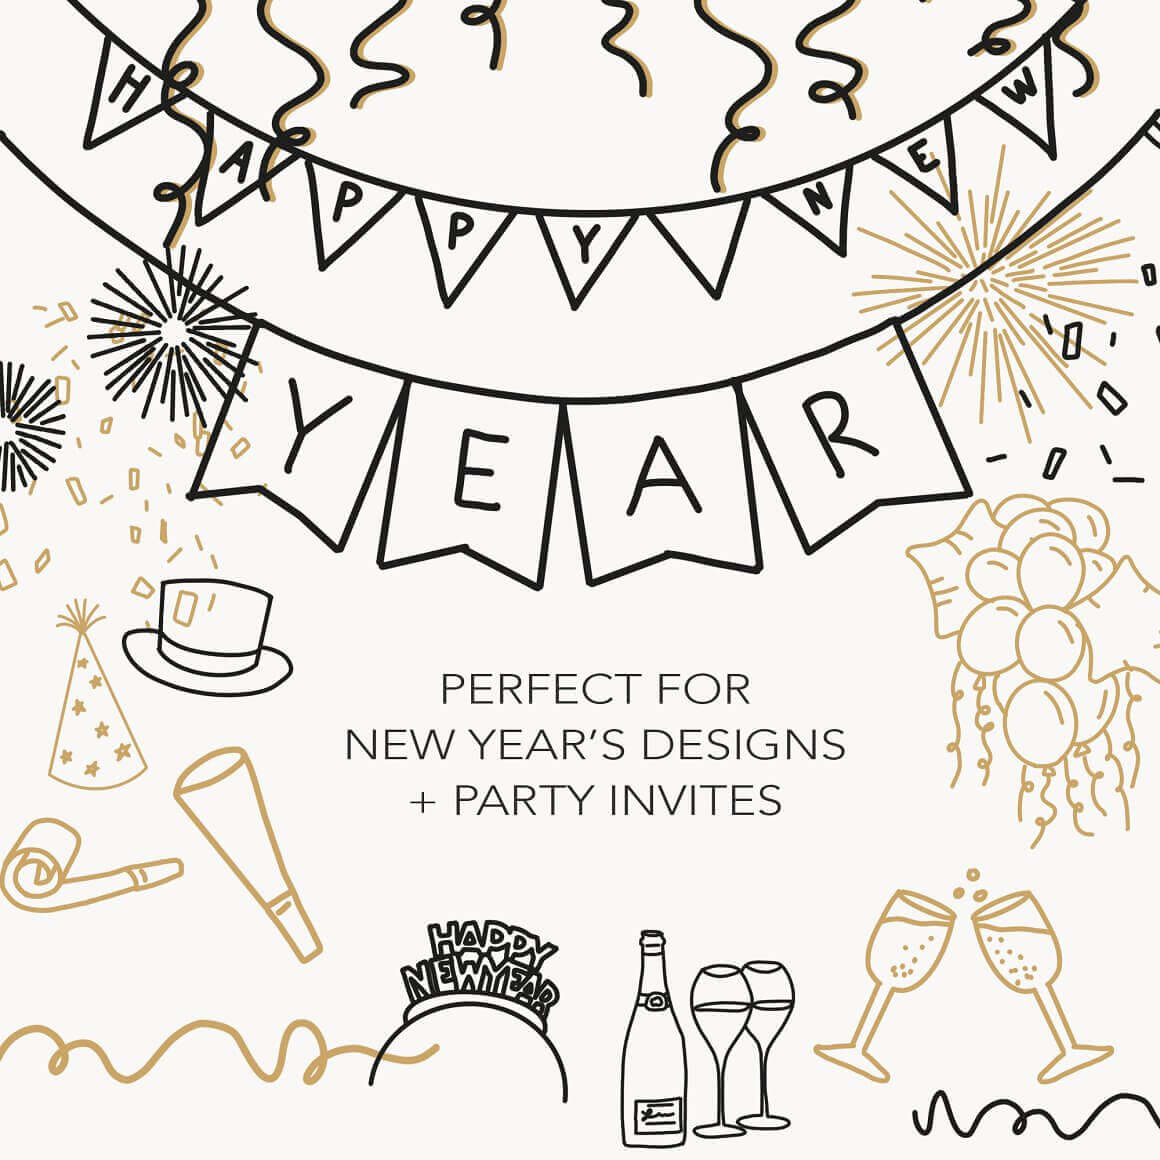 Images for New Year's designs and for party invites.